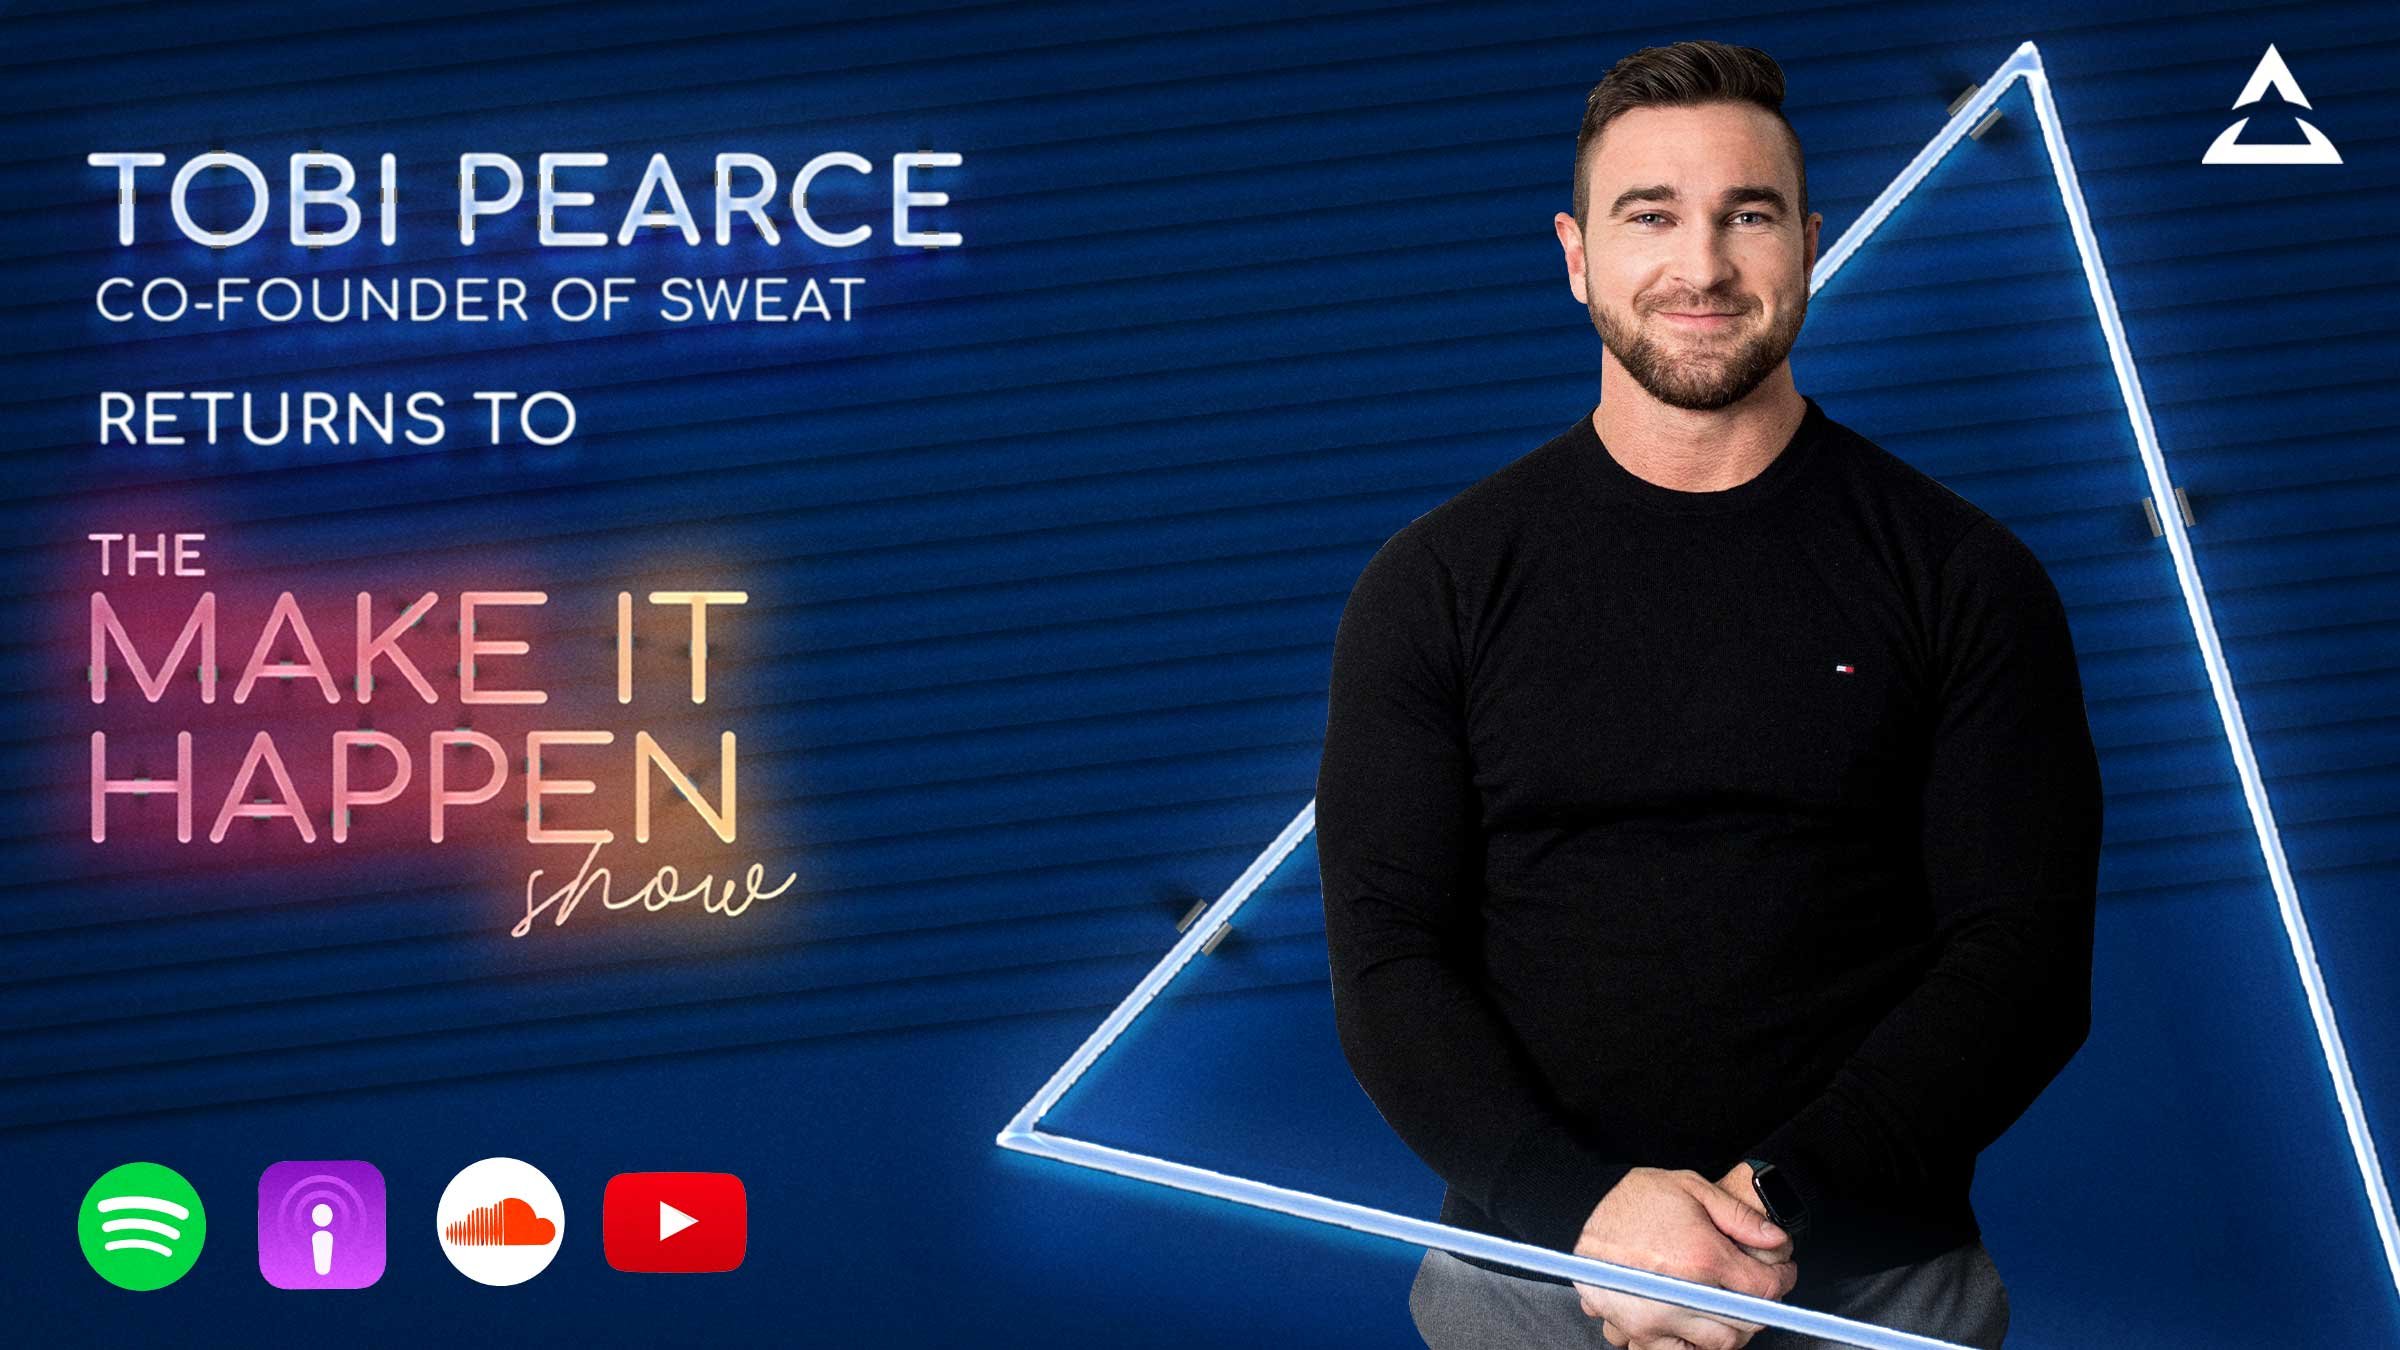 Tobi Pearce, Co-Founder of Sweat, returns to The Make It Happen Show